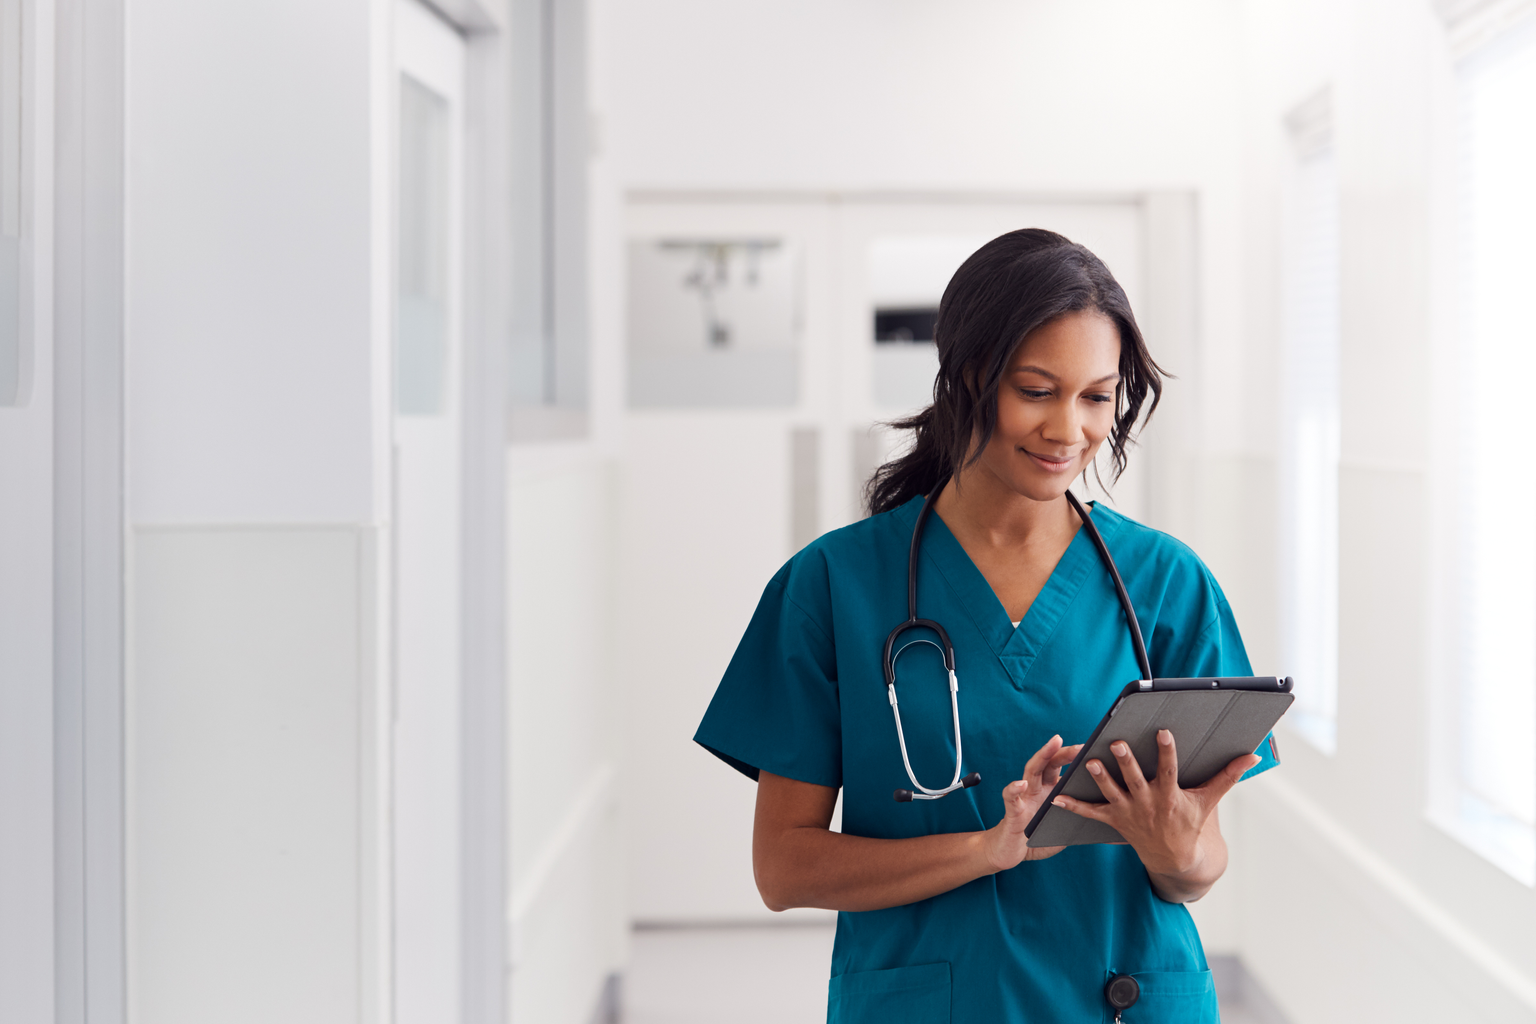 Empowering healthcare professionals with trusted and unified clinical decision support solutions